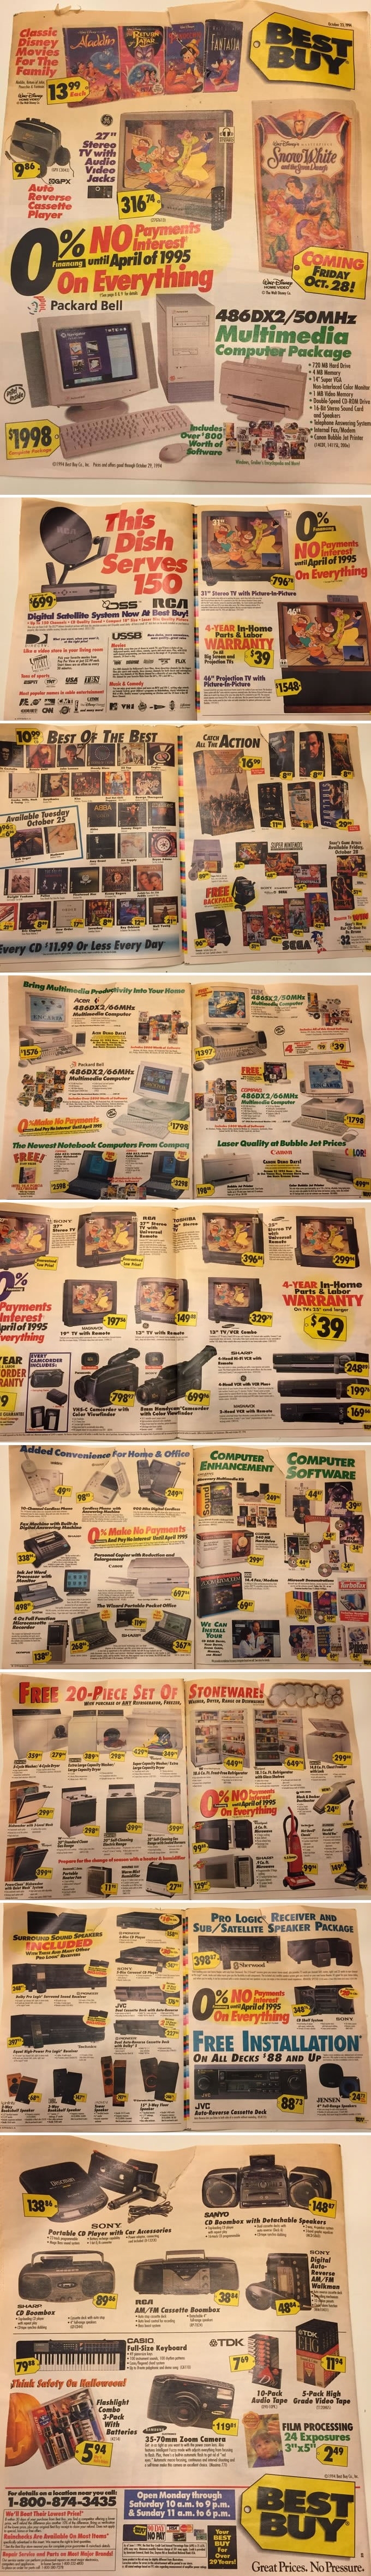 Best Buy sale ad from October 23, 1994